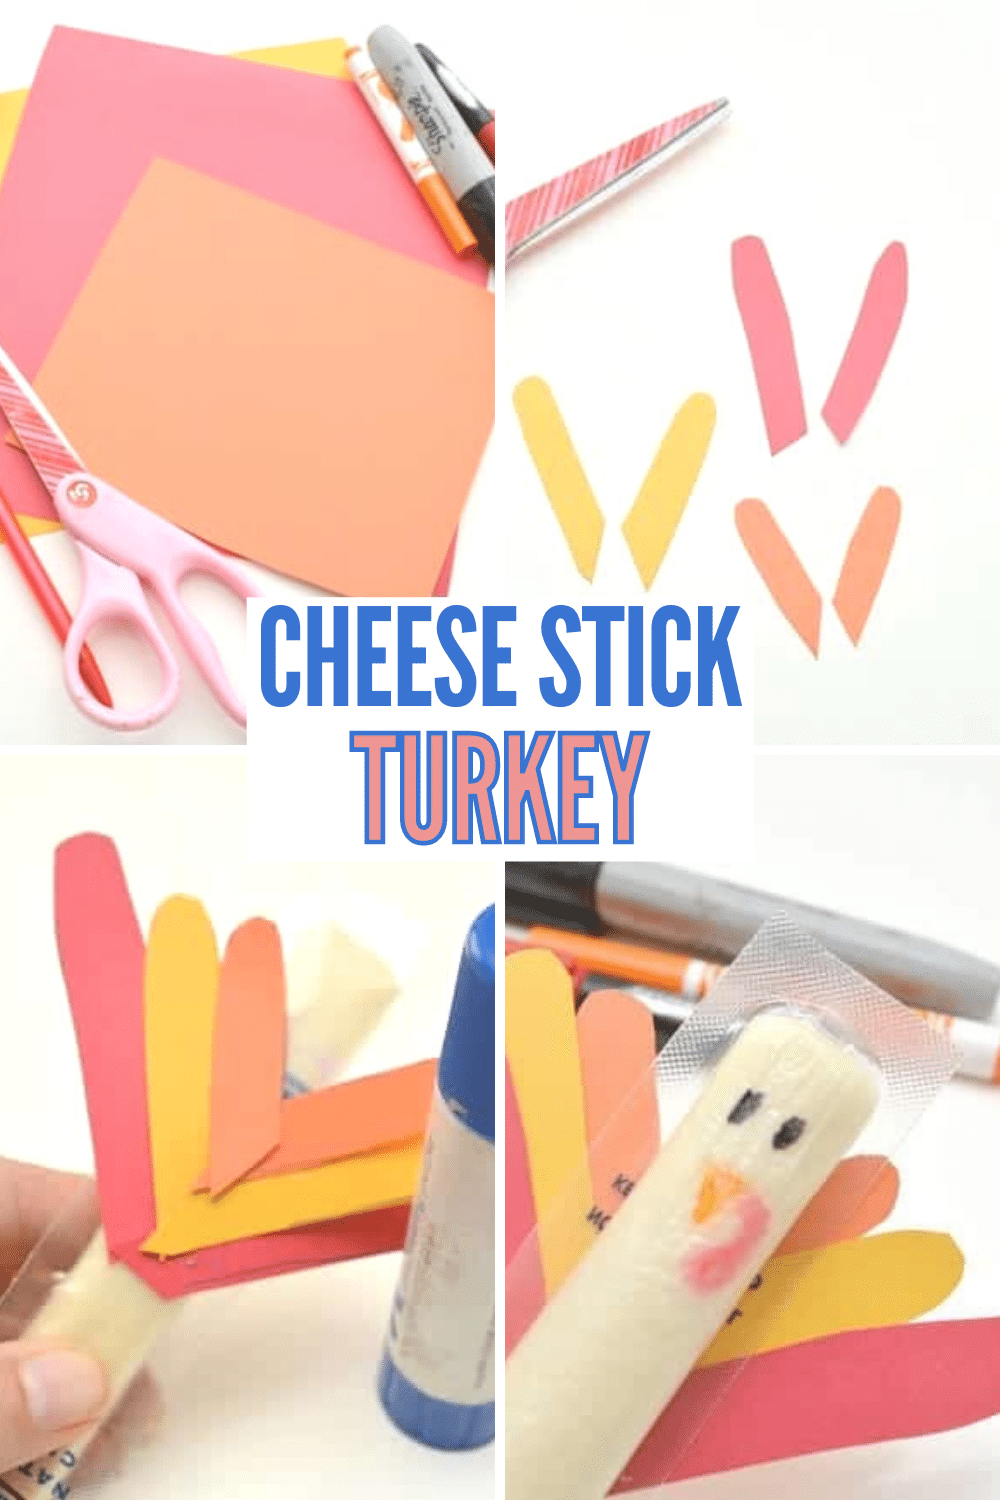 Learn to make a festive cheese stick turkey for your Thanksgiving table.